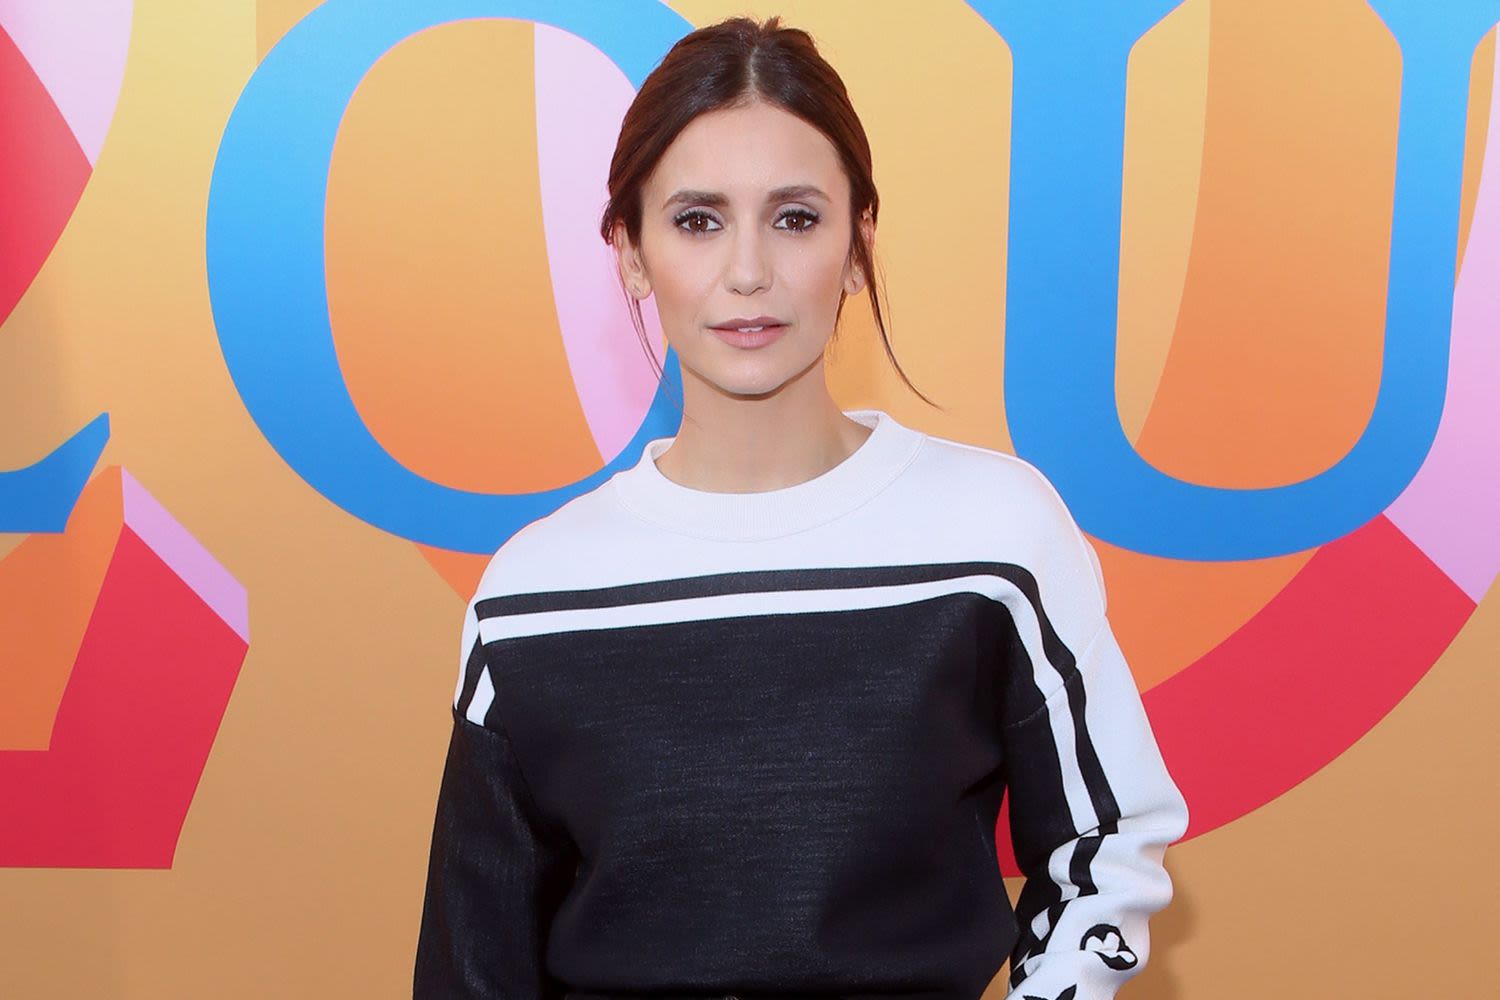 Nina Dobrev gives update after e-bike accident and hospitalization: 'Life looks a lil different lately'